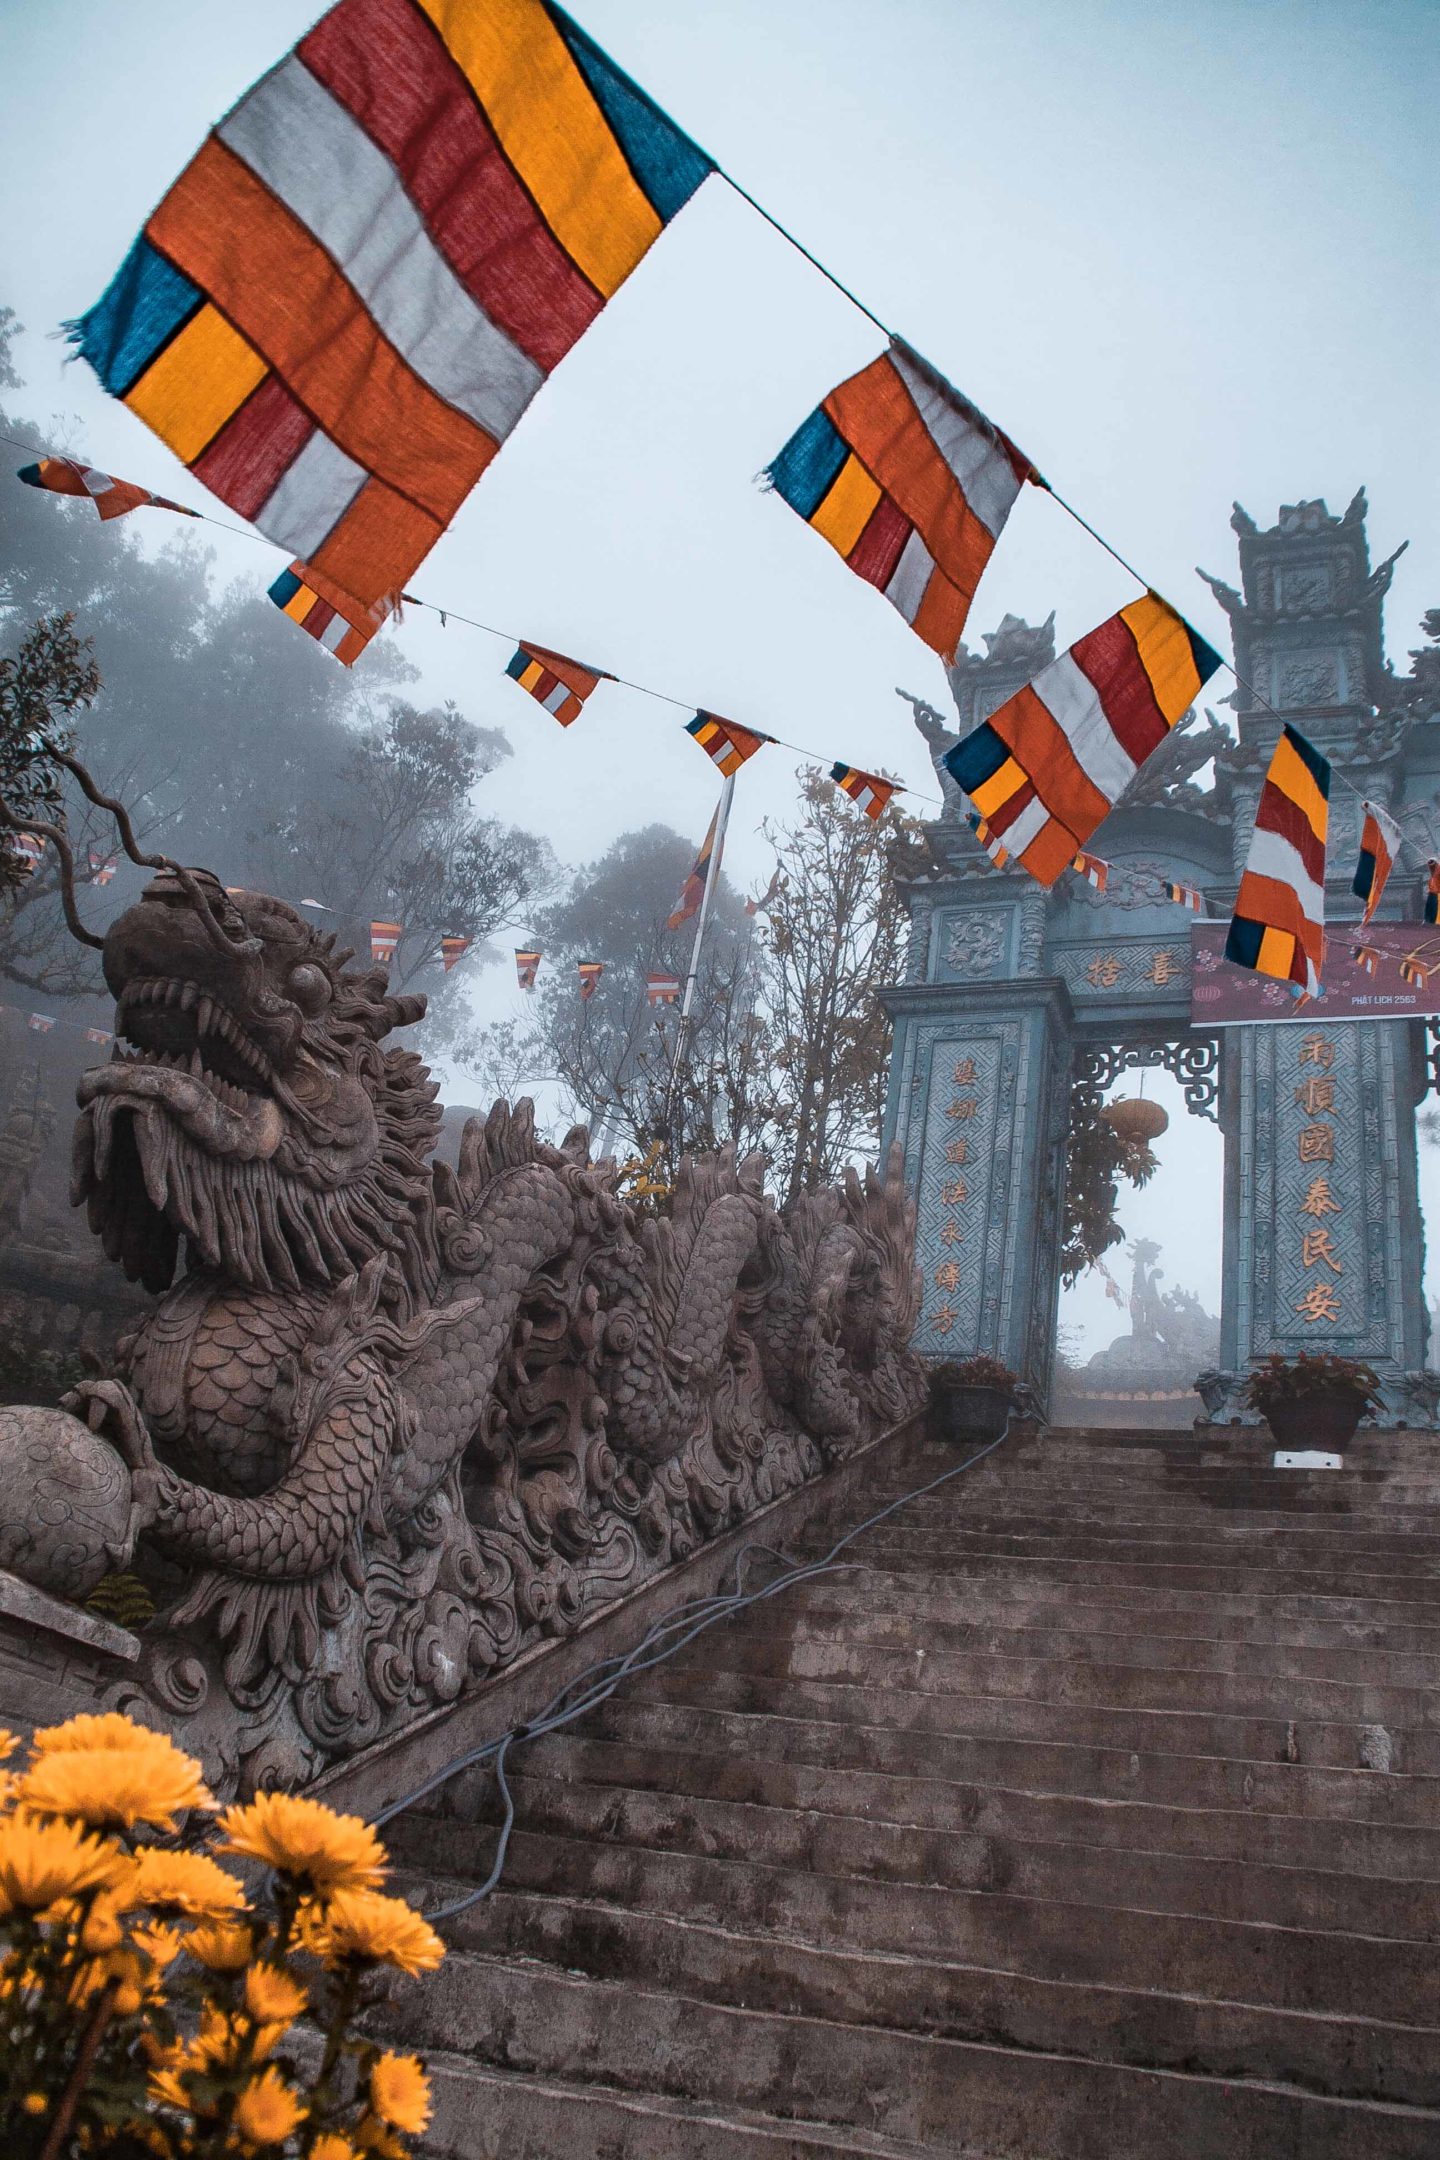 Architecture and flags on a Buddhist temple in the Ba Na Hills, Da Nang